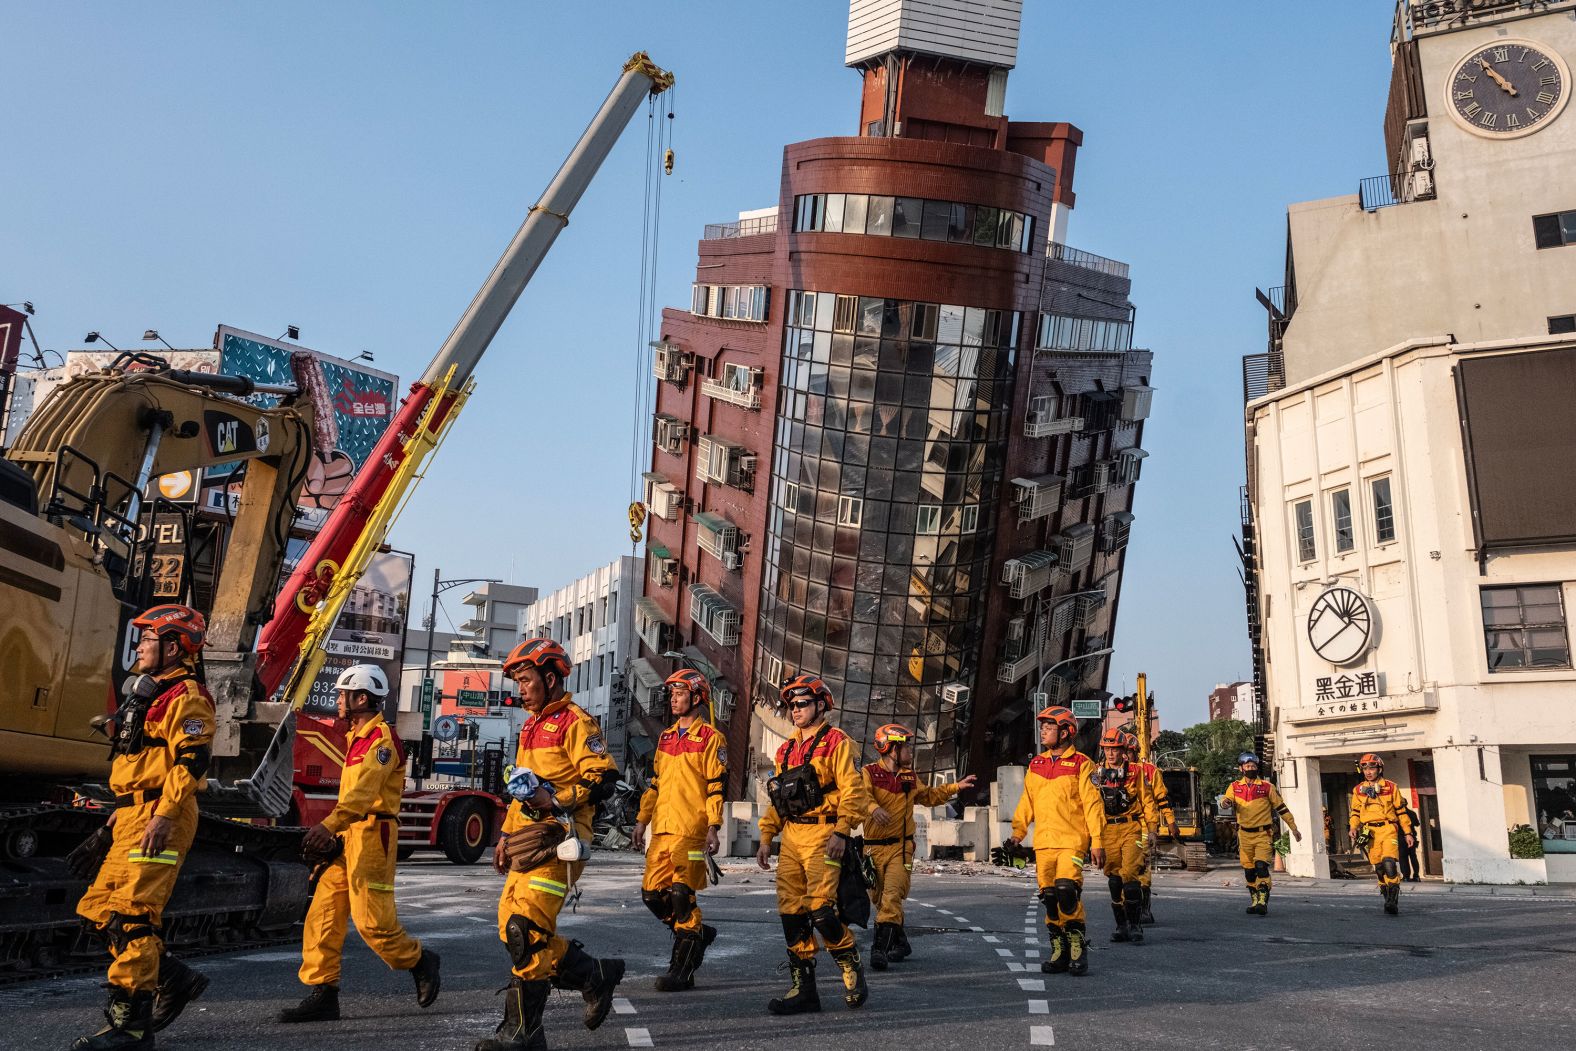 Search-and-rescue workers prepare to enter a leaning building in Hualien, Taiwan, after a <a href="index.php?page=&url=https%3A%2F%2Fwww.cnn.com%2F2024%2F04%2F02%2Fasia%2Ftaiwan-earthquake-tsunami-warning-intl-hnk%2Findex.html" target="_blank">7.4 magnitude earthquake</a> struck on Wednesday, April 3. It was the island's strongest earthquake in 25 years. At least nine people were killed, and more than 900 were injured.